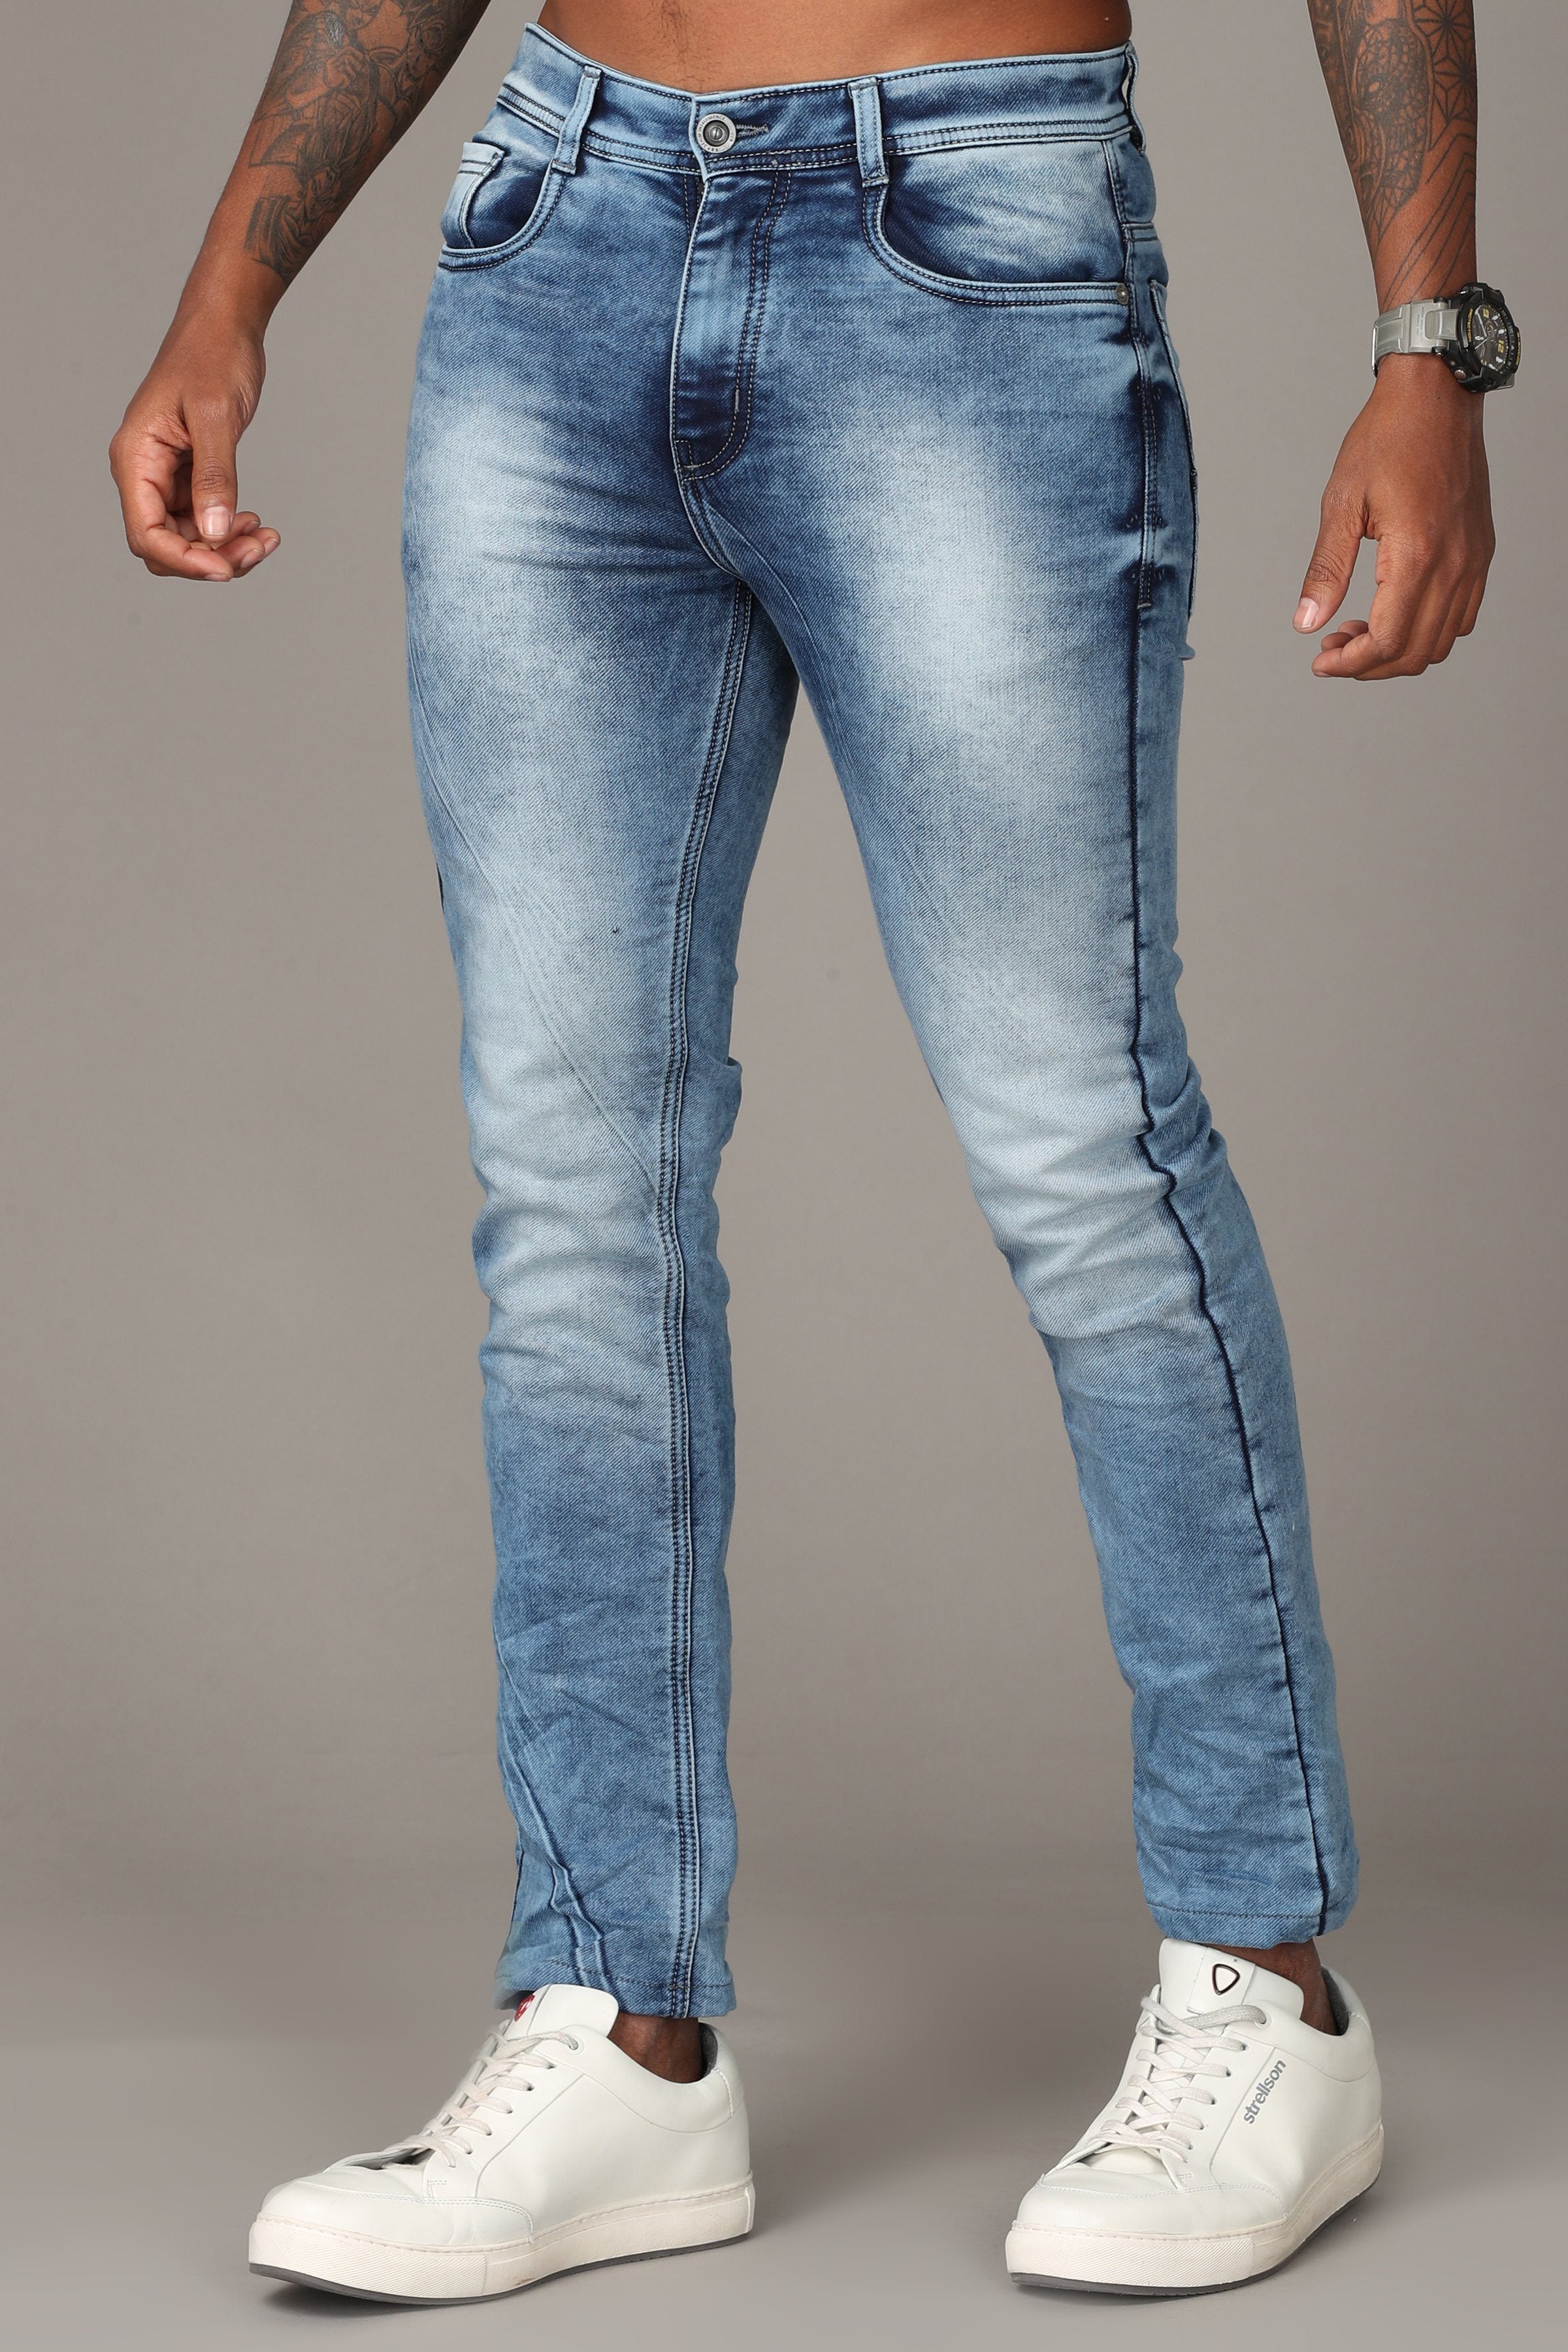 Blue with Light Fade Jeans Jeans KEF 30 